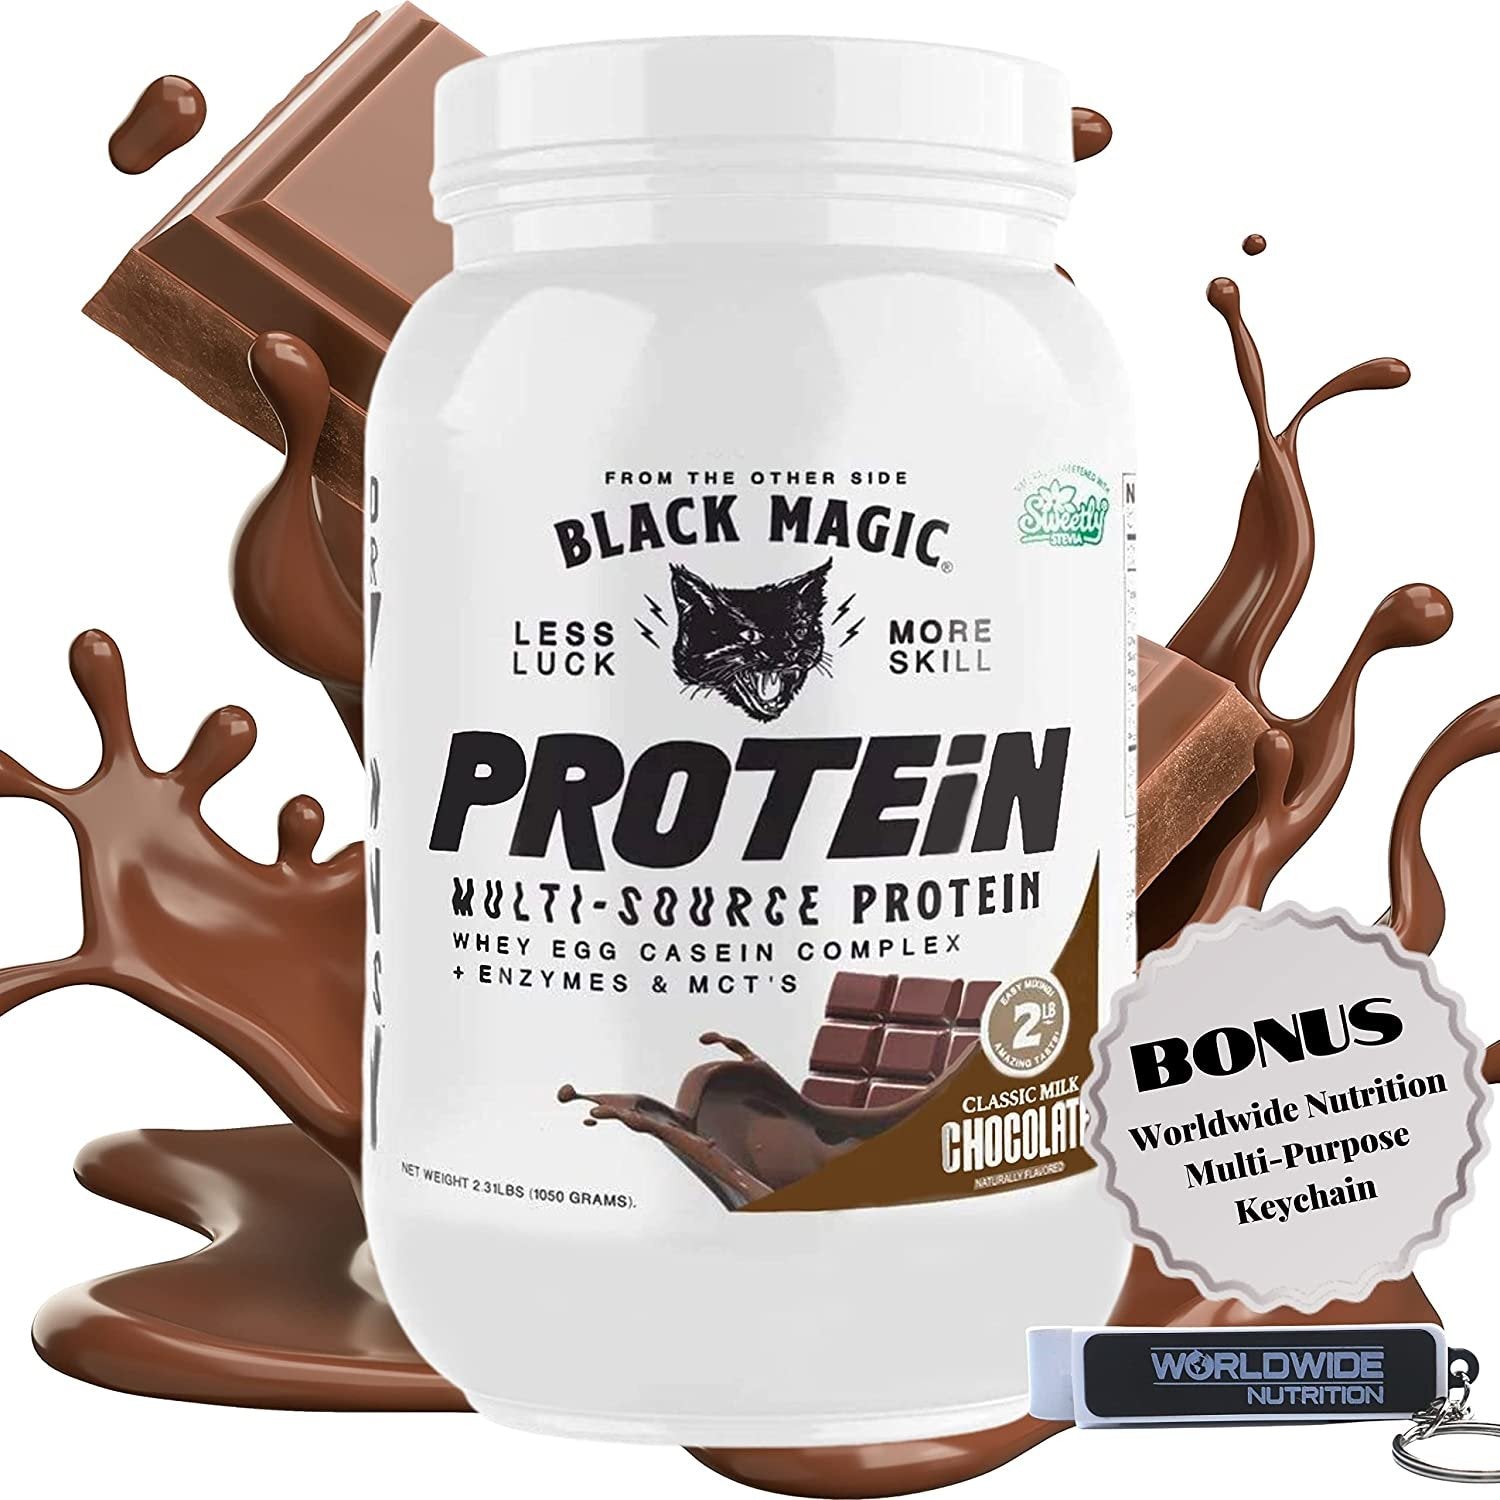 Milk Chocolate Black Magic Multi-Source Protein - Whey, Egg, and Casein Complex with Enzymes & MCT Powder - Pre Workout and Post Workout - 24g Protein - 2 LB with Bonus Key Chain